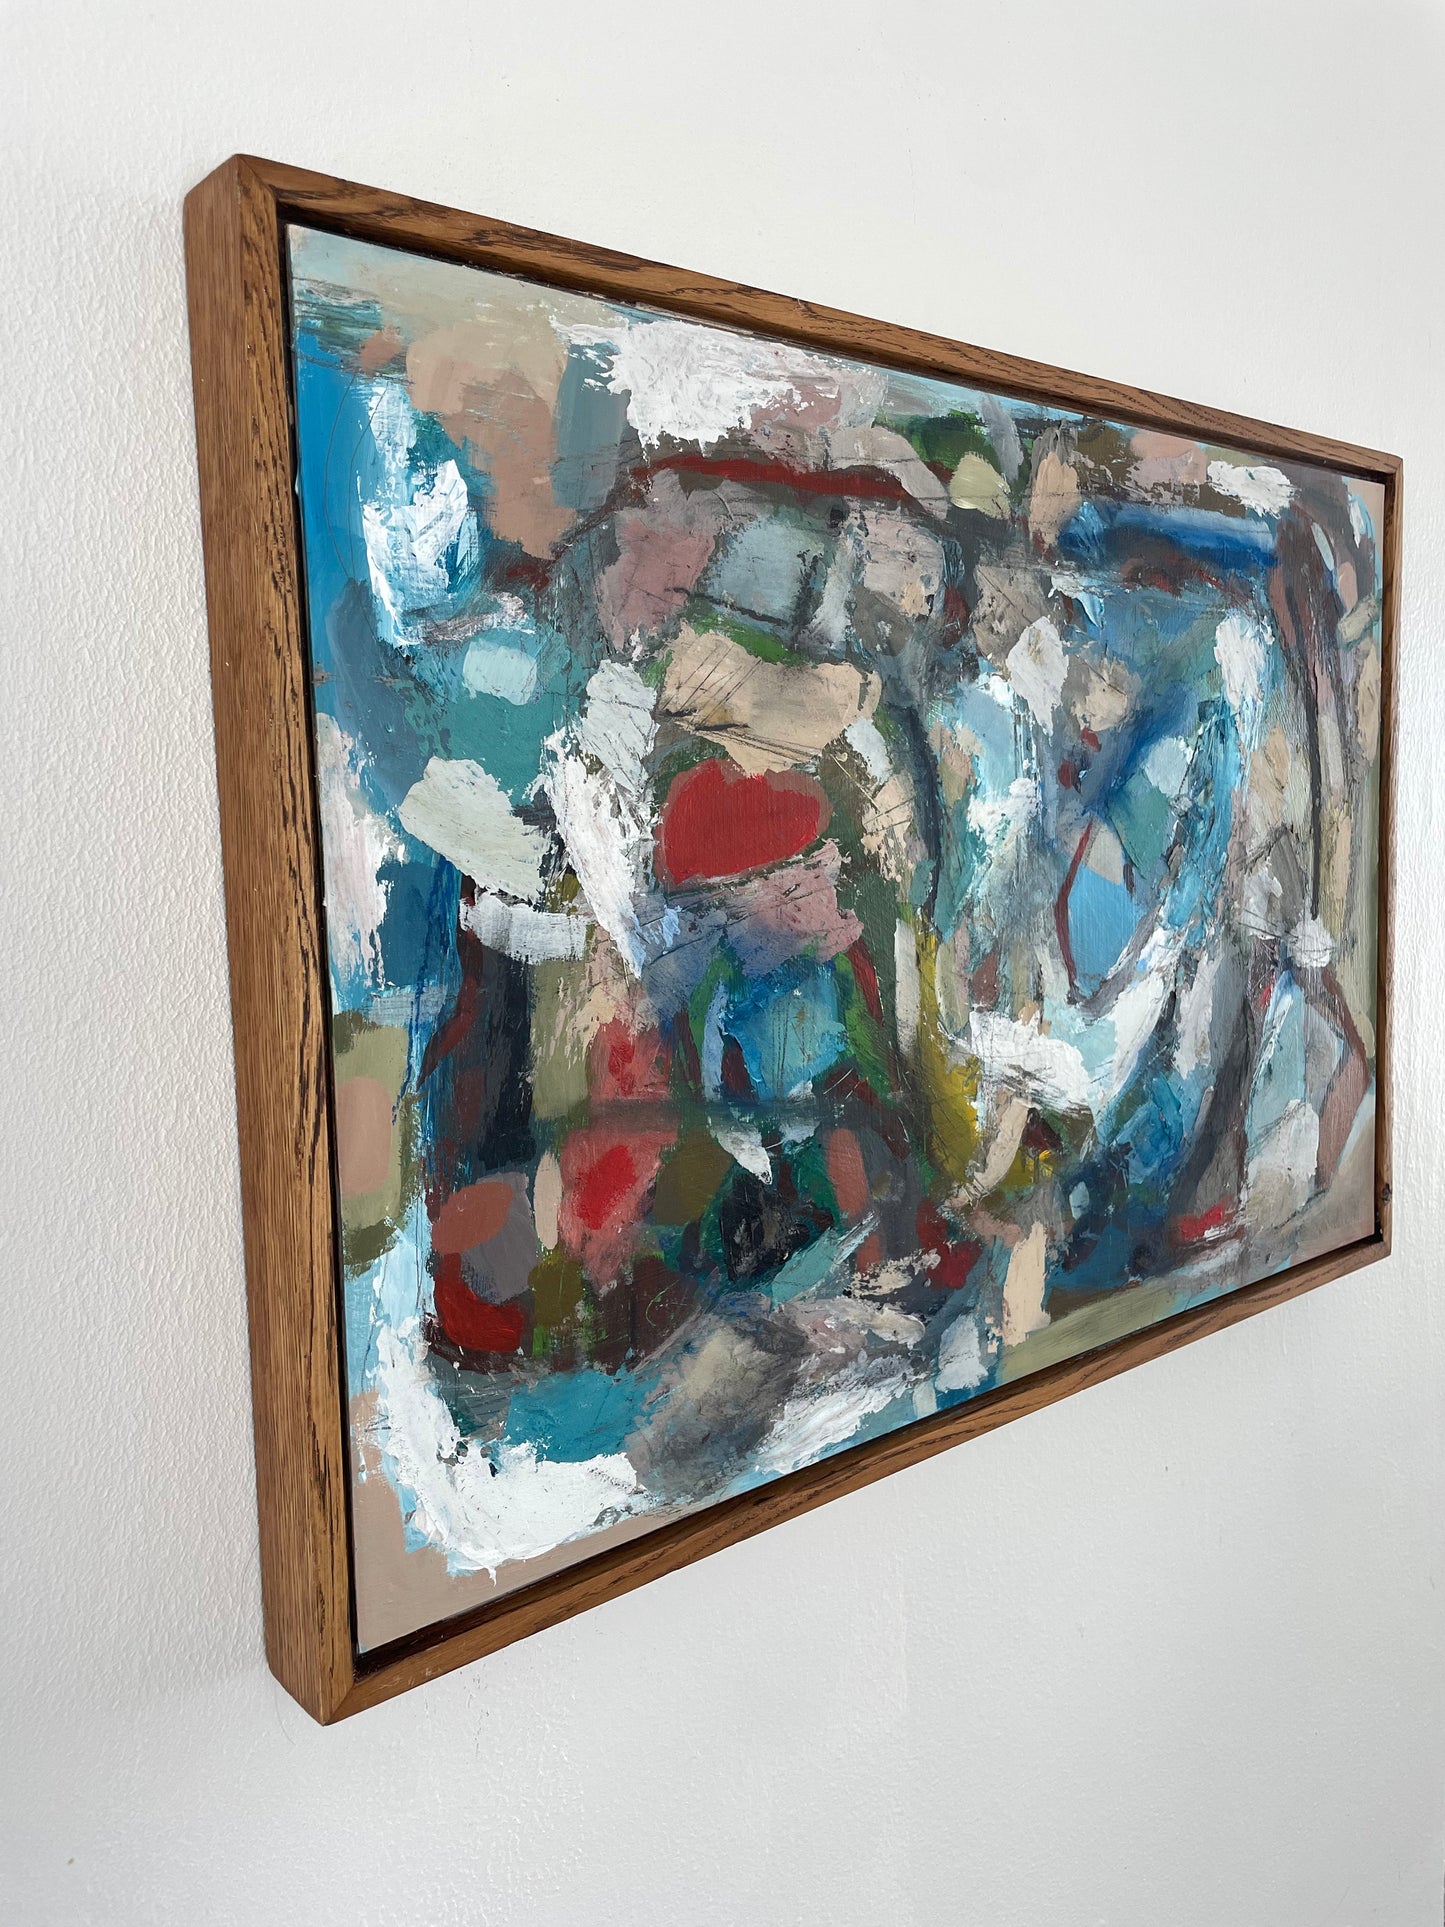 A Breath About Nothing by Francisco Peña Framed Abstract Acrylic on Board